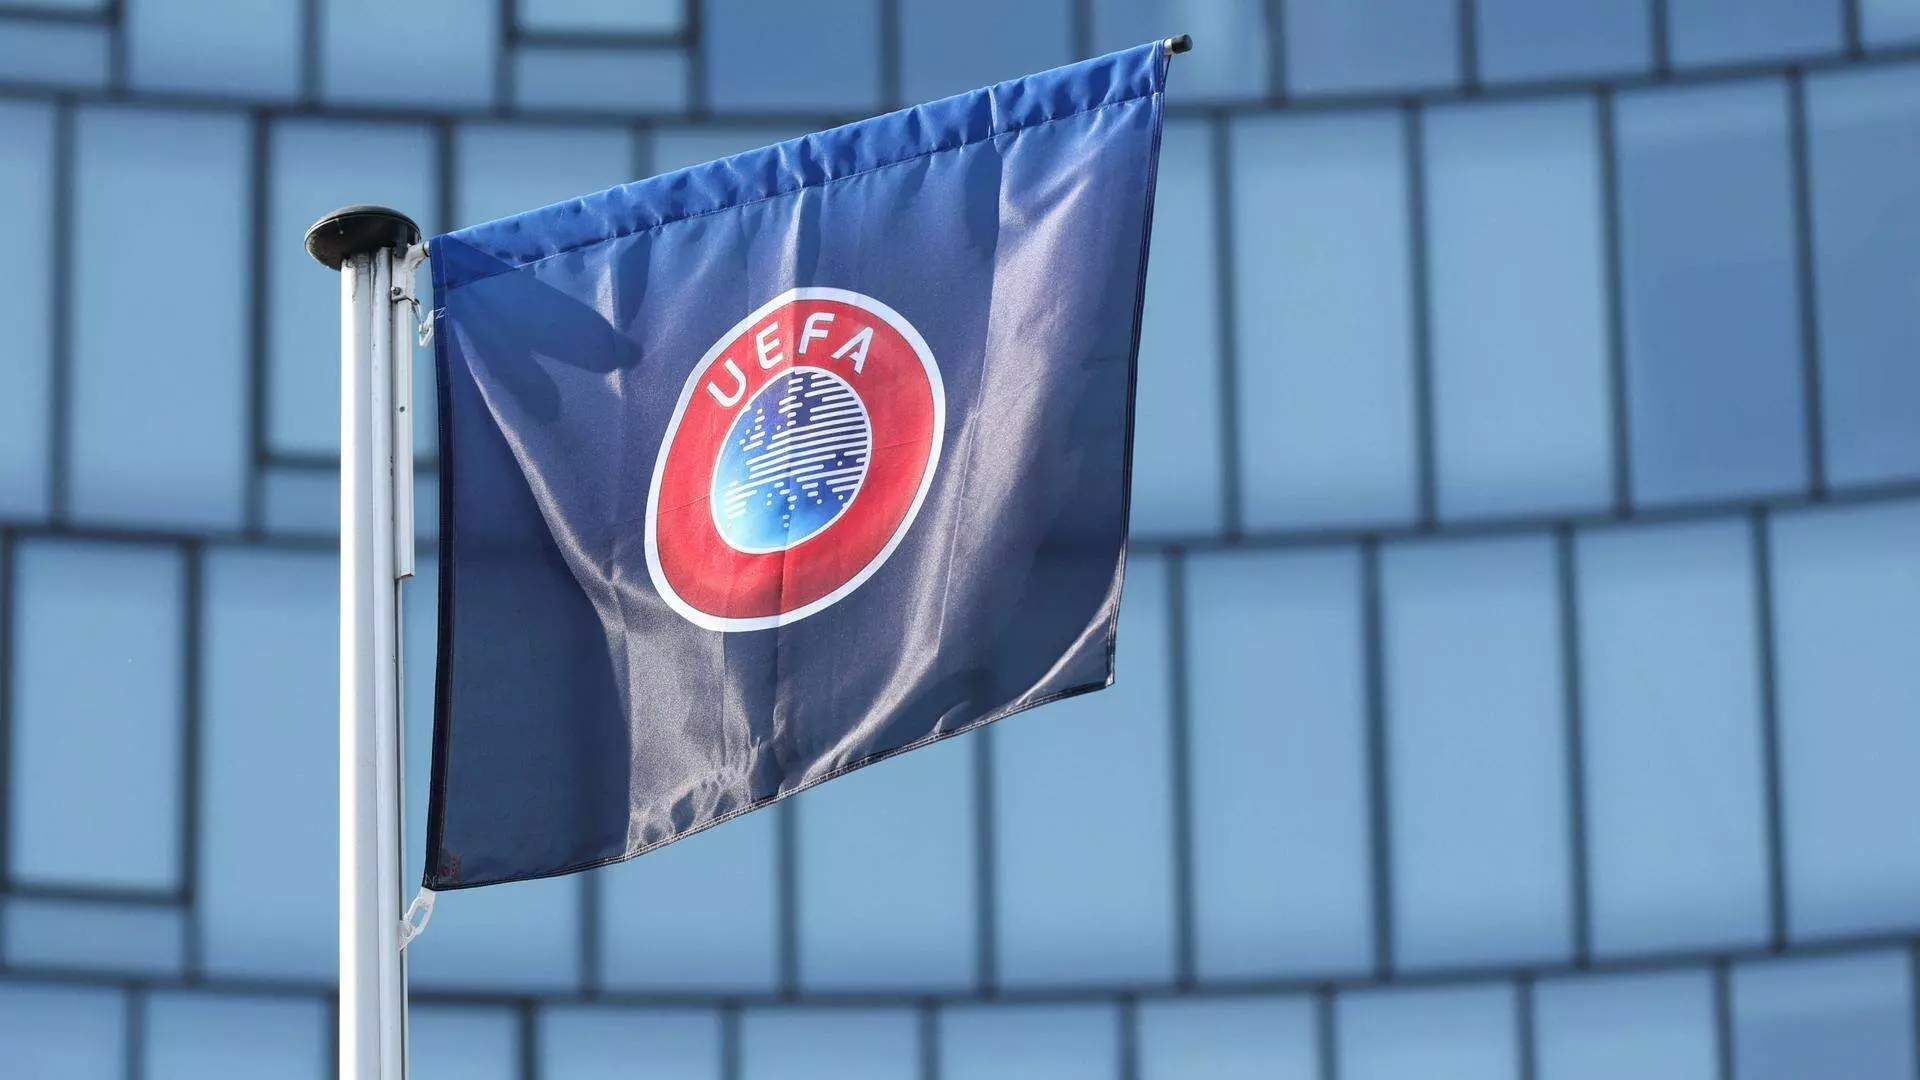 Security concern: UEFA suspends its matches in Israel